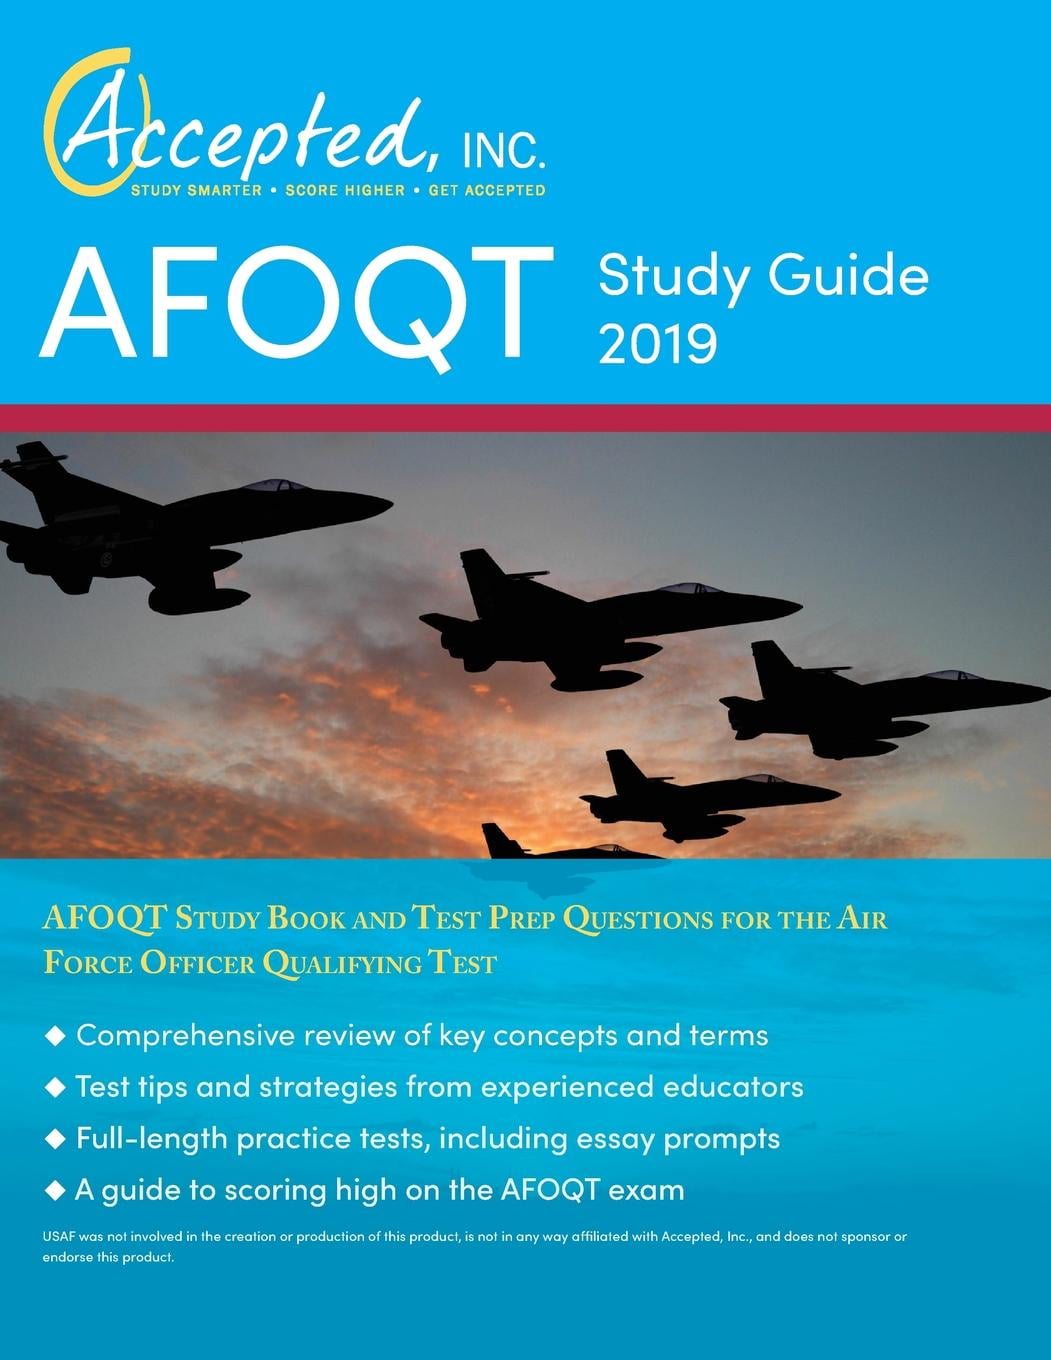 afoqt-study-guide-2019-afoqt-study-book-and-test-prep-questions-for-the-air-force-officer